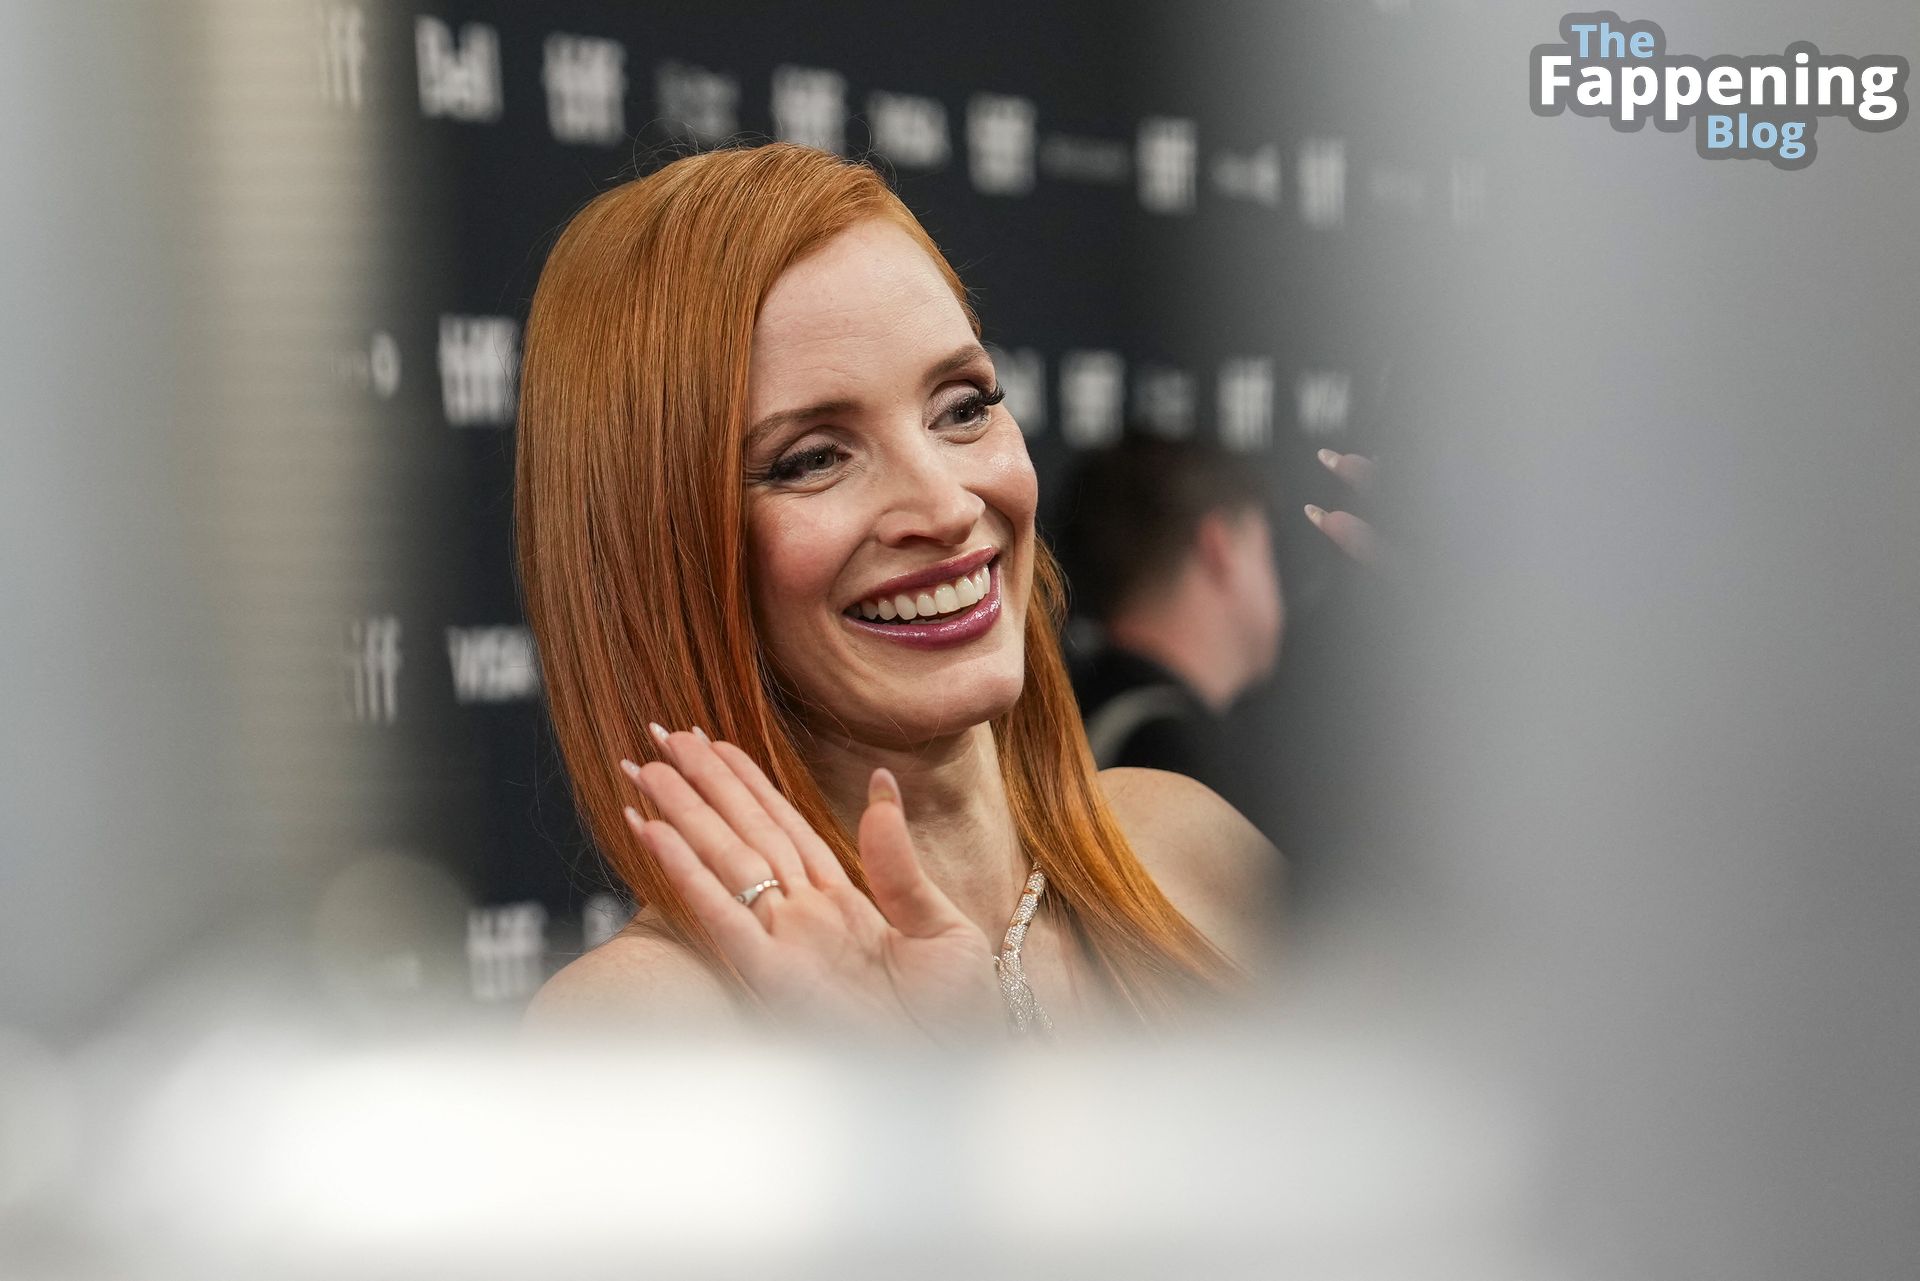 Jessica-Chastain-Sexy-7-The-Fappening-Blog.jpg